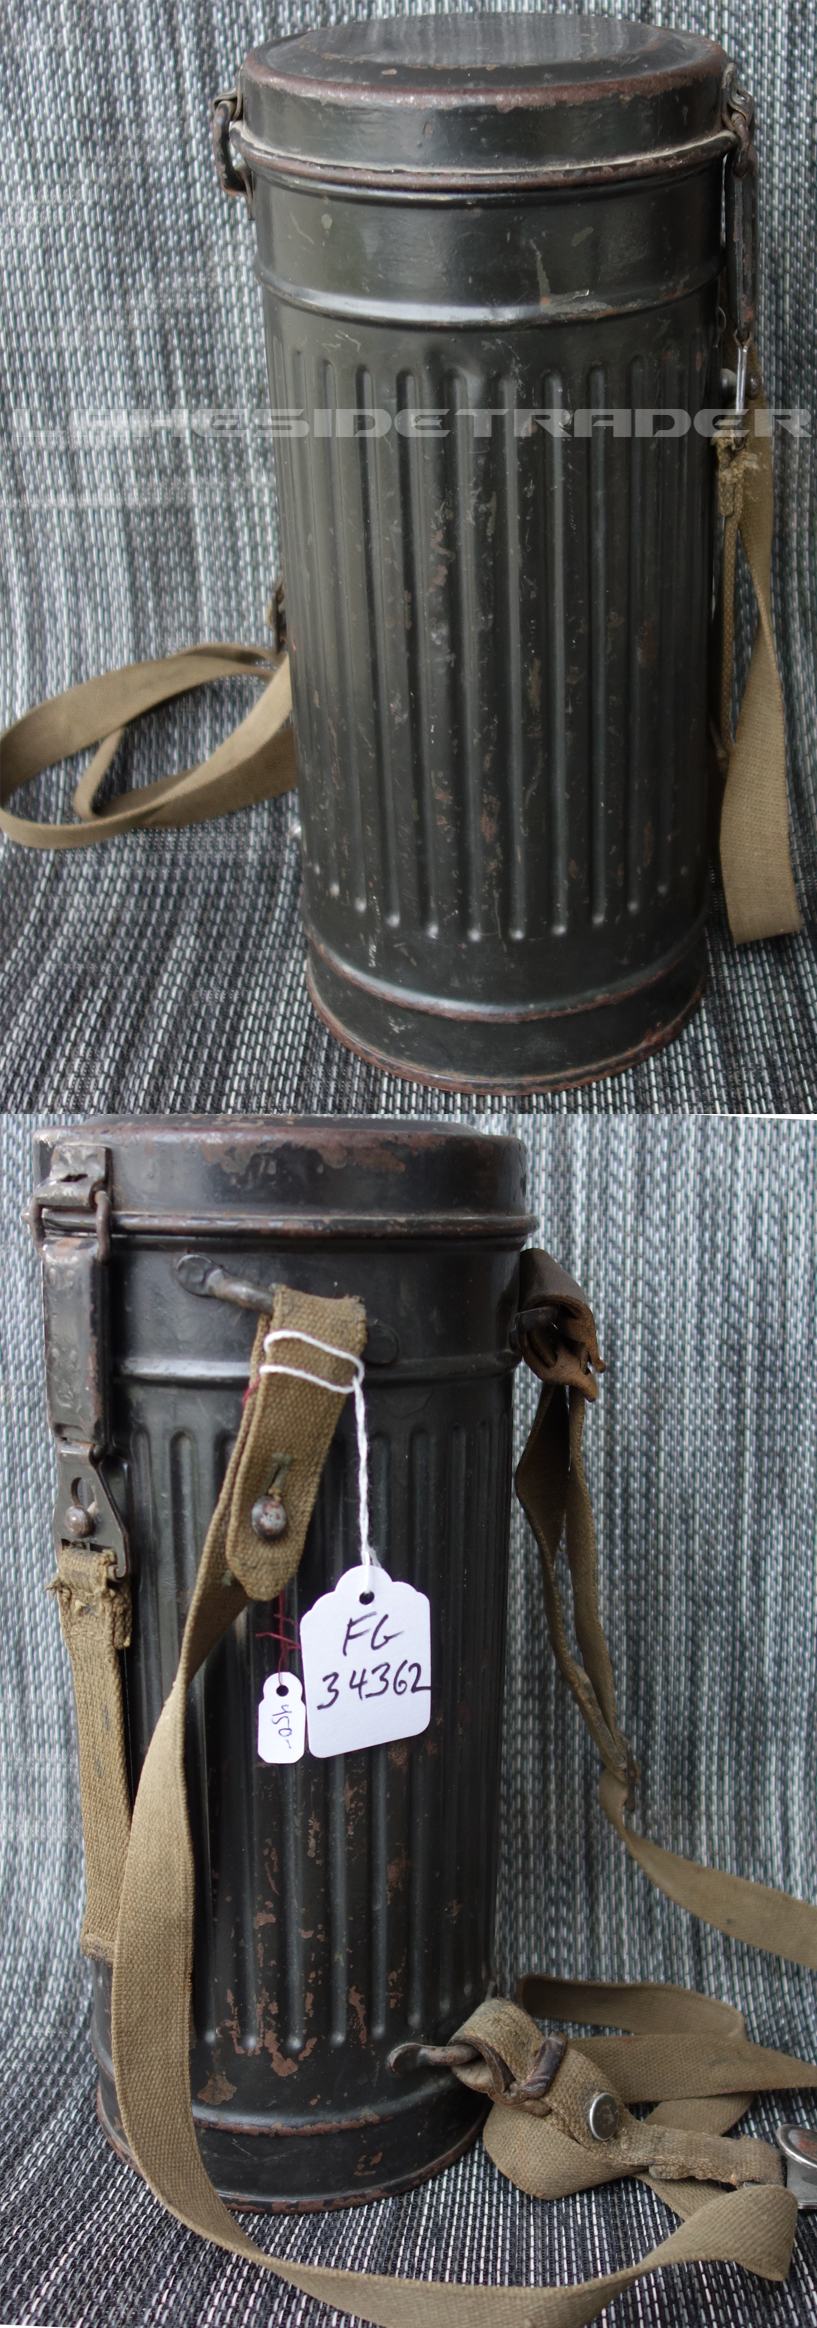 Navy Gas Mask & Canister